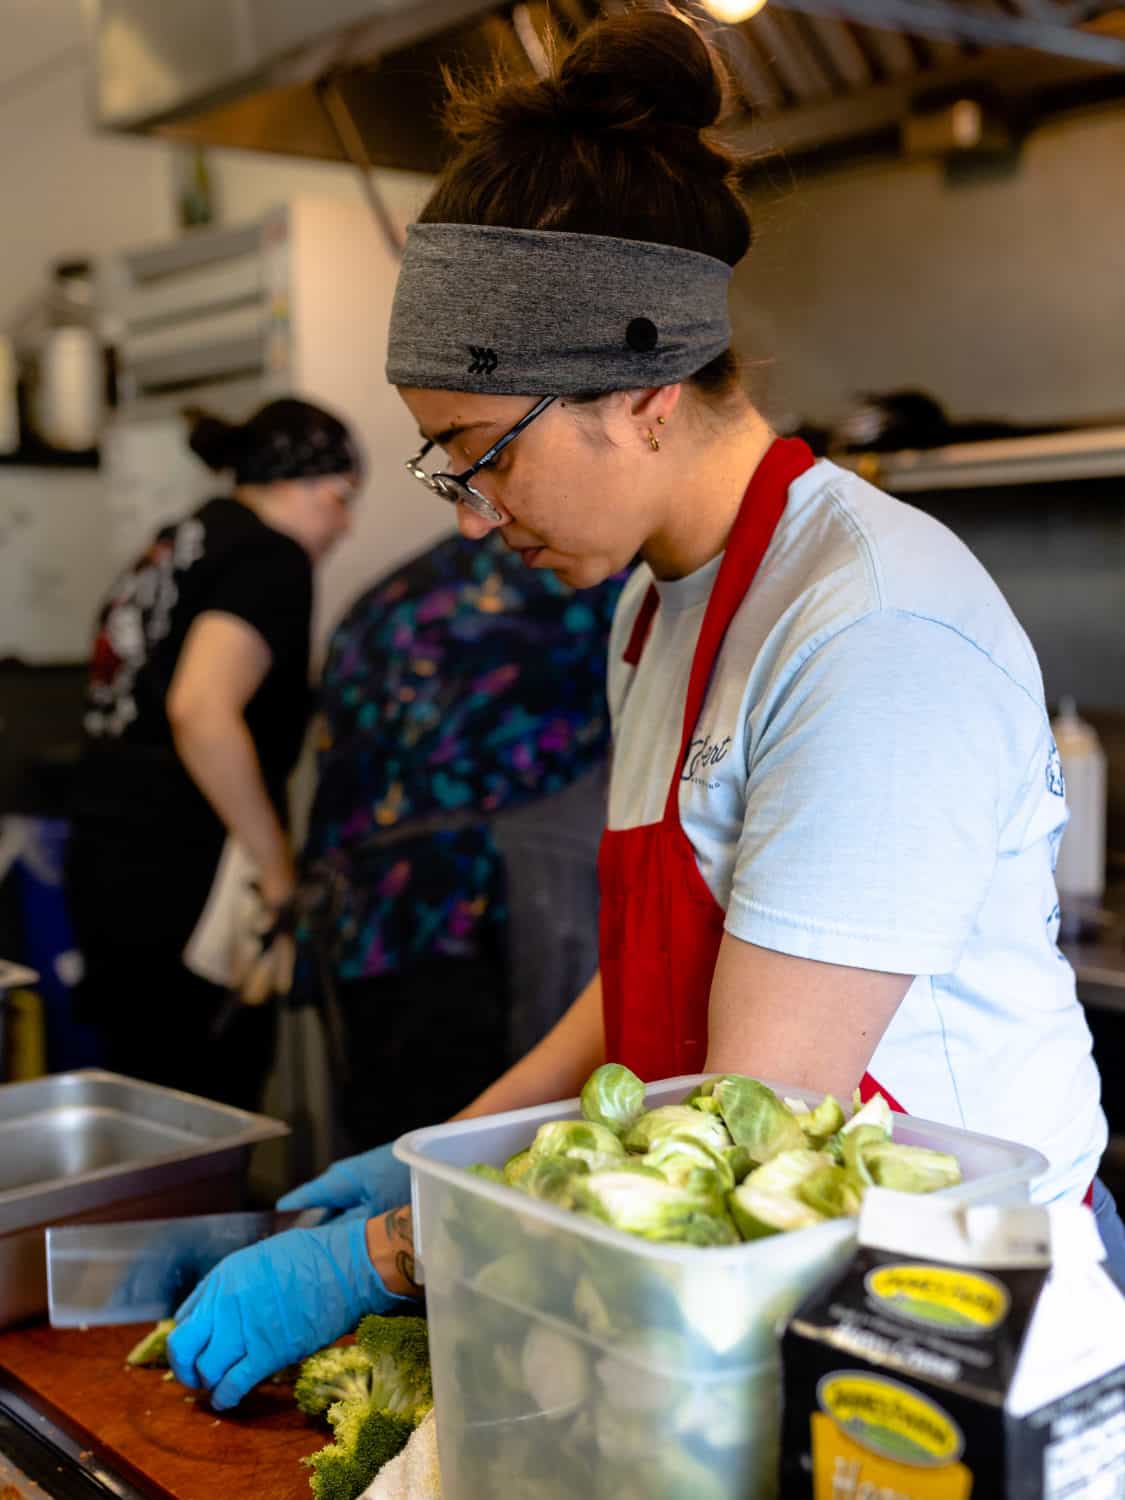 Libelula (restaurant) in Downtown Fresno, CA sources produce from local farmer's markets and vendors.
May 2023
Sous chef prepares brussels sprouts
Photography by Hilary Rance